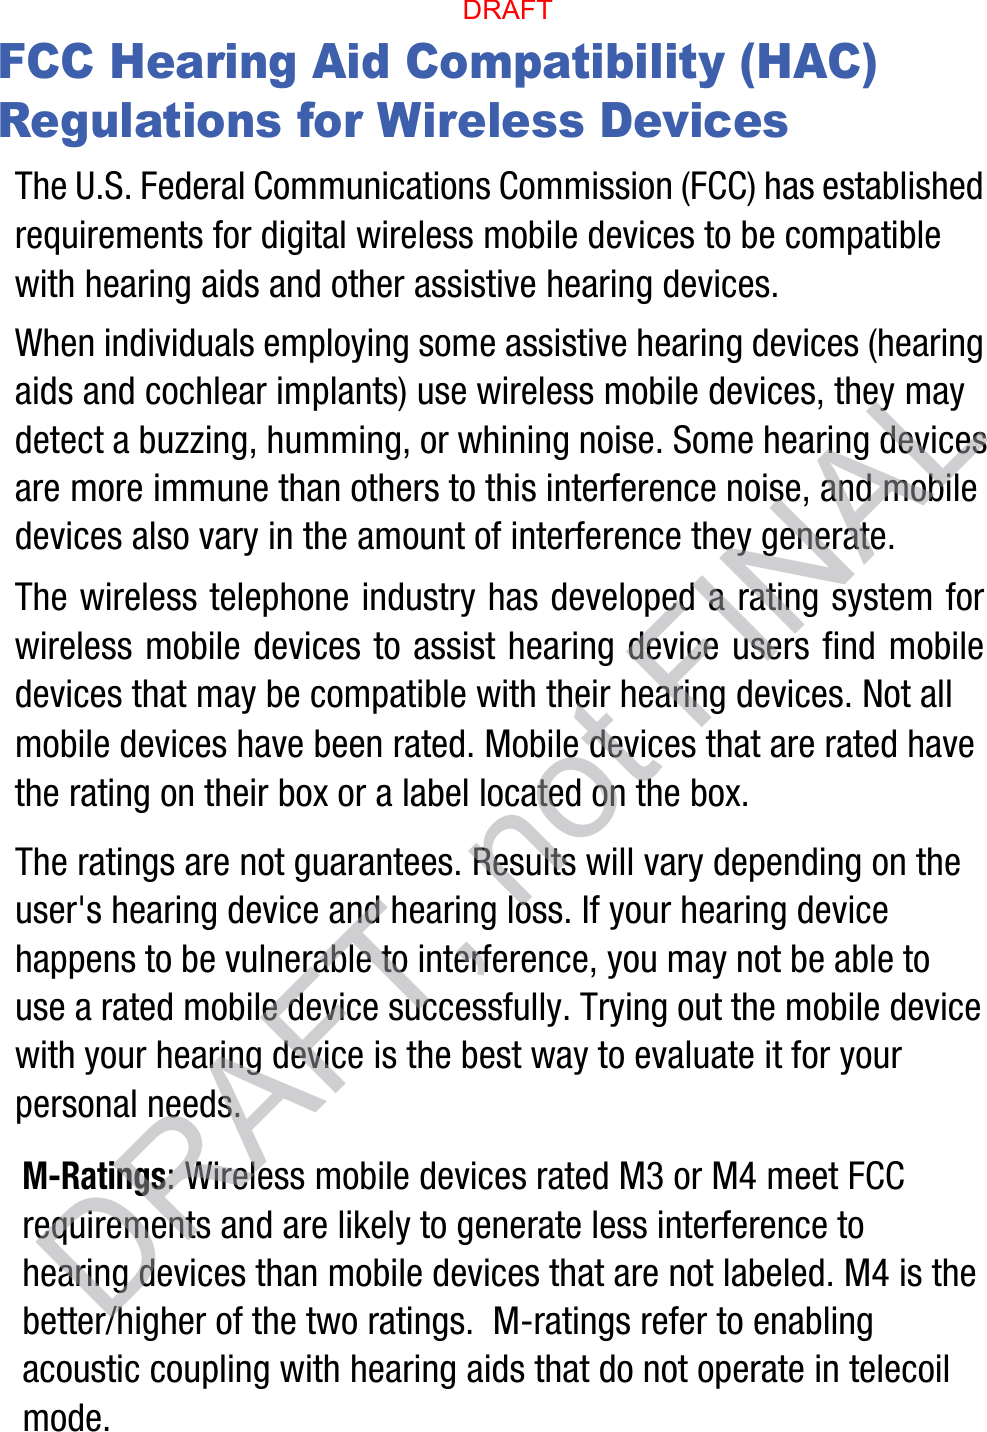 FCC Hearing Aid Compatibility (HAC) Regulations for Wireless DevicesThe U.S. Federal Communications Commission (FCC) has established requirements for digital wireless mobile devices to be compatible with hearing aids and other assistive hearing devices.When individuals employing some assistive hearing devices (hearing aids and cochlear implants) use wireless mobile devices, they may detect a buzzing, humming, or whining noise. Some hearing devices are more immune than others to this interference noise, and mobile devices also vary in the amount of interference they generate.The wireless telephone industry has developed a rating system for wireless mobile devices to assist hearing device users find mobile devices that may be compatible with their hearing devices. Not all mobile devices have been rated. Mobile devices that are rated have the rating on their box or a label located on the box.The ratings are not guarantees. Results will vary depending on the user&apos;s hearing device and hearing loss. If your hearing device happens to be vulnerable to interference, you may not be able to use a rated mobile device successfully. Trying out the mobile device with your hearing device is the best way to evaluate it for your personal needs.M-Ratings: Wireless mobile devices rated M3 or M4 meet FCC requirements and are likely to generate less interference to hearing devices than mobile devices that are not labeled. M4 is the better/higher of the two ratings.  M-ratings refer to enabling acoustic coupling with hearing aids that do not operate in telecoil mode.DRAFTDRAFT, not FINAL